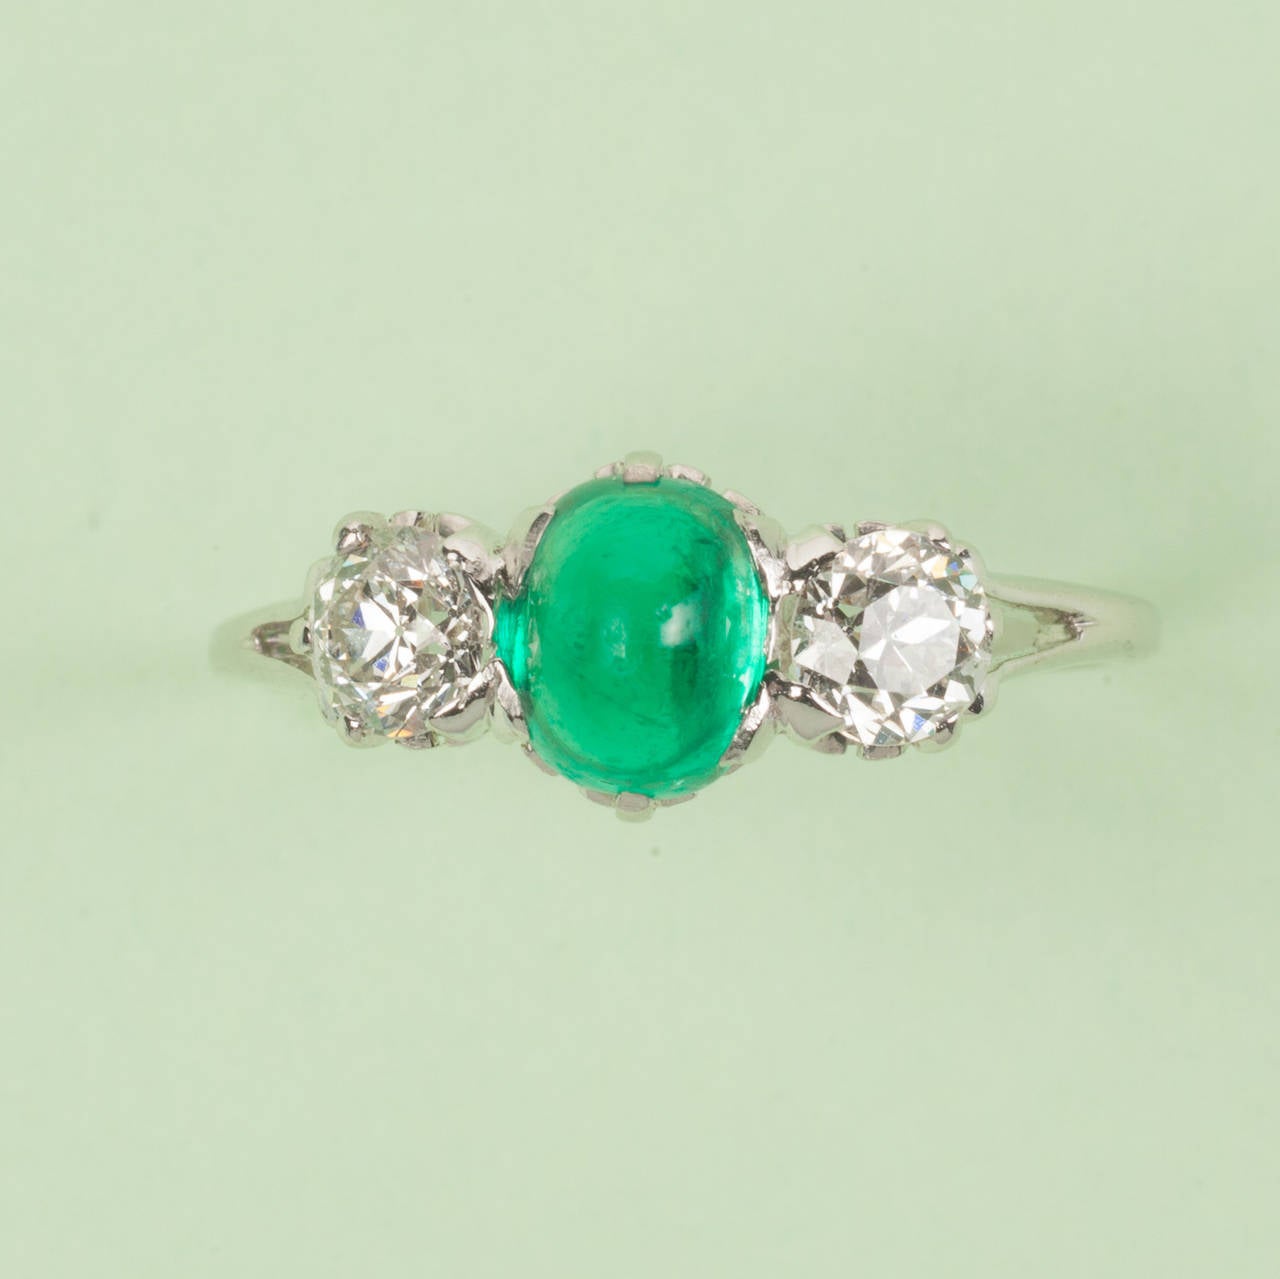 A platinum ring set with a high oval cabochon cut emerald with on each side an old cut diamond (app. 0.4 carat in total), signed: Tiffany & Co., US, circa 1910.

ring size: 15.75 mm. 5 US.
weight: 2.7 grams